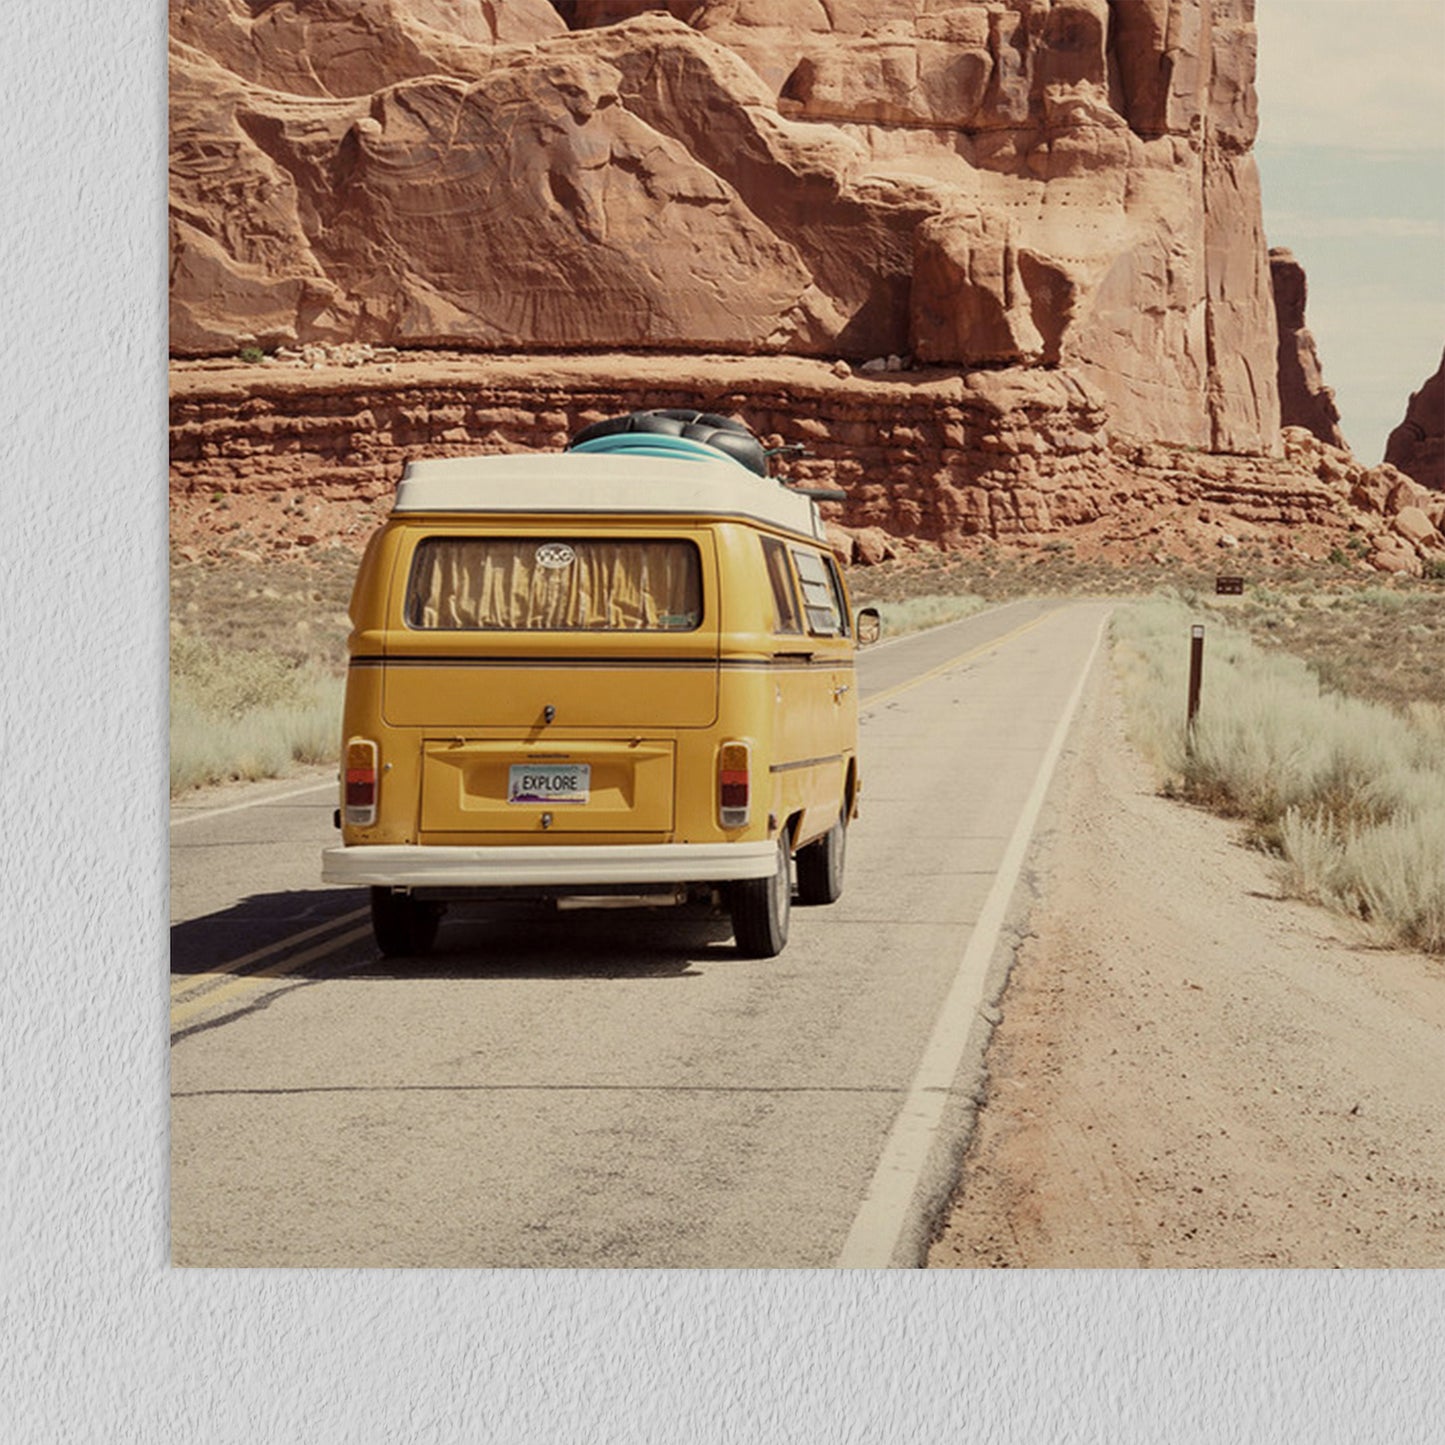 (Set of 3) Triptych Wall Art Desert Drives Photography by Tanya Shumkina - Poster Print